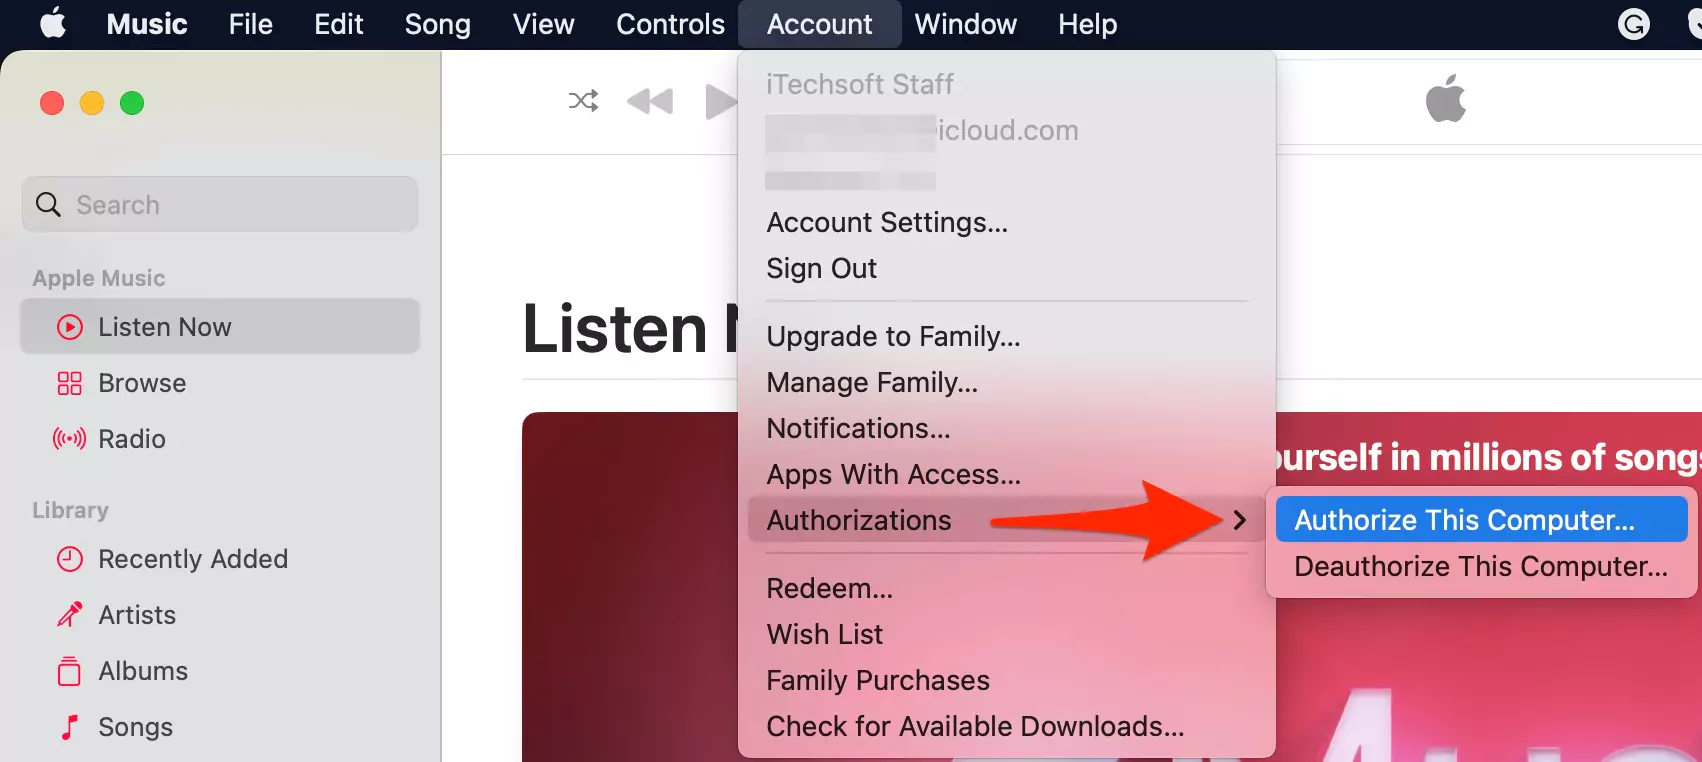 authorize-this-computerfor-apple-music-on-mac